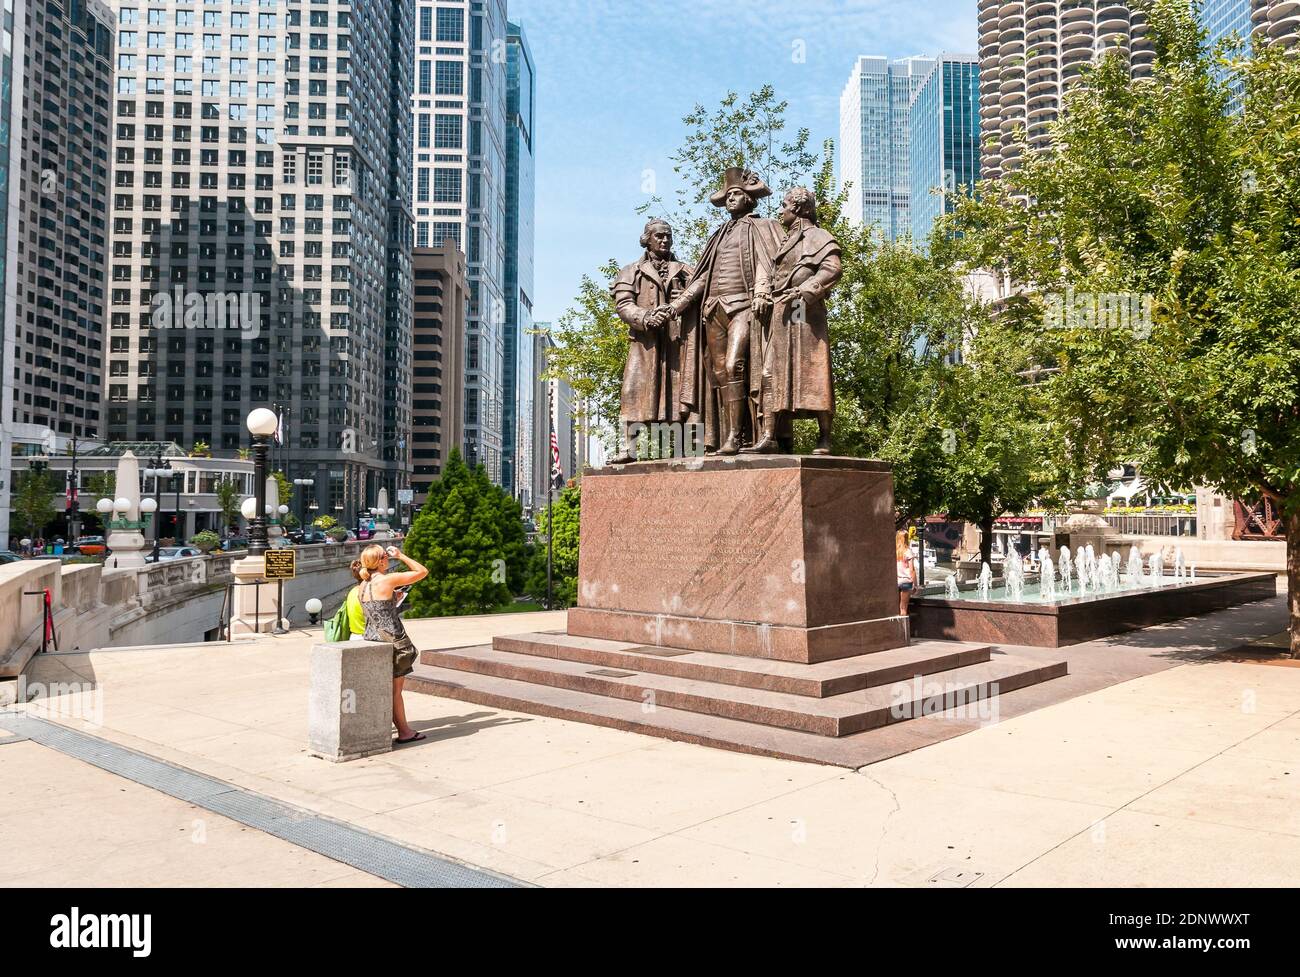 Heald Square Monument in Chicago downtown, it depicts General George Washington and financiers of the American Revolution, Robert Morris and Haym Salo Stock Photo